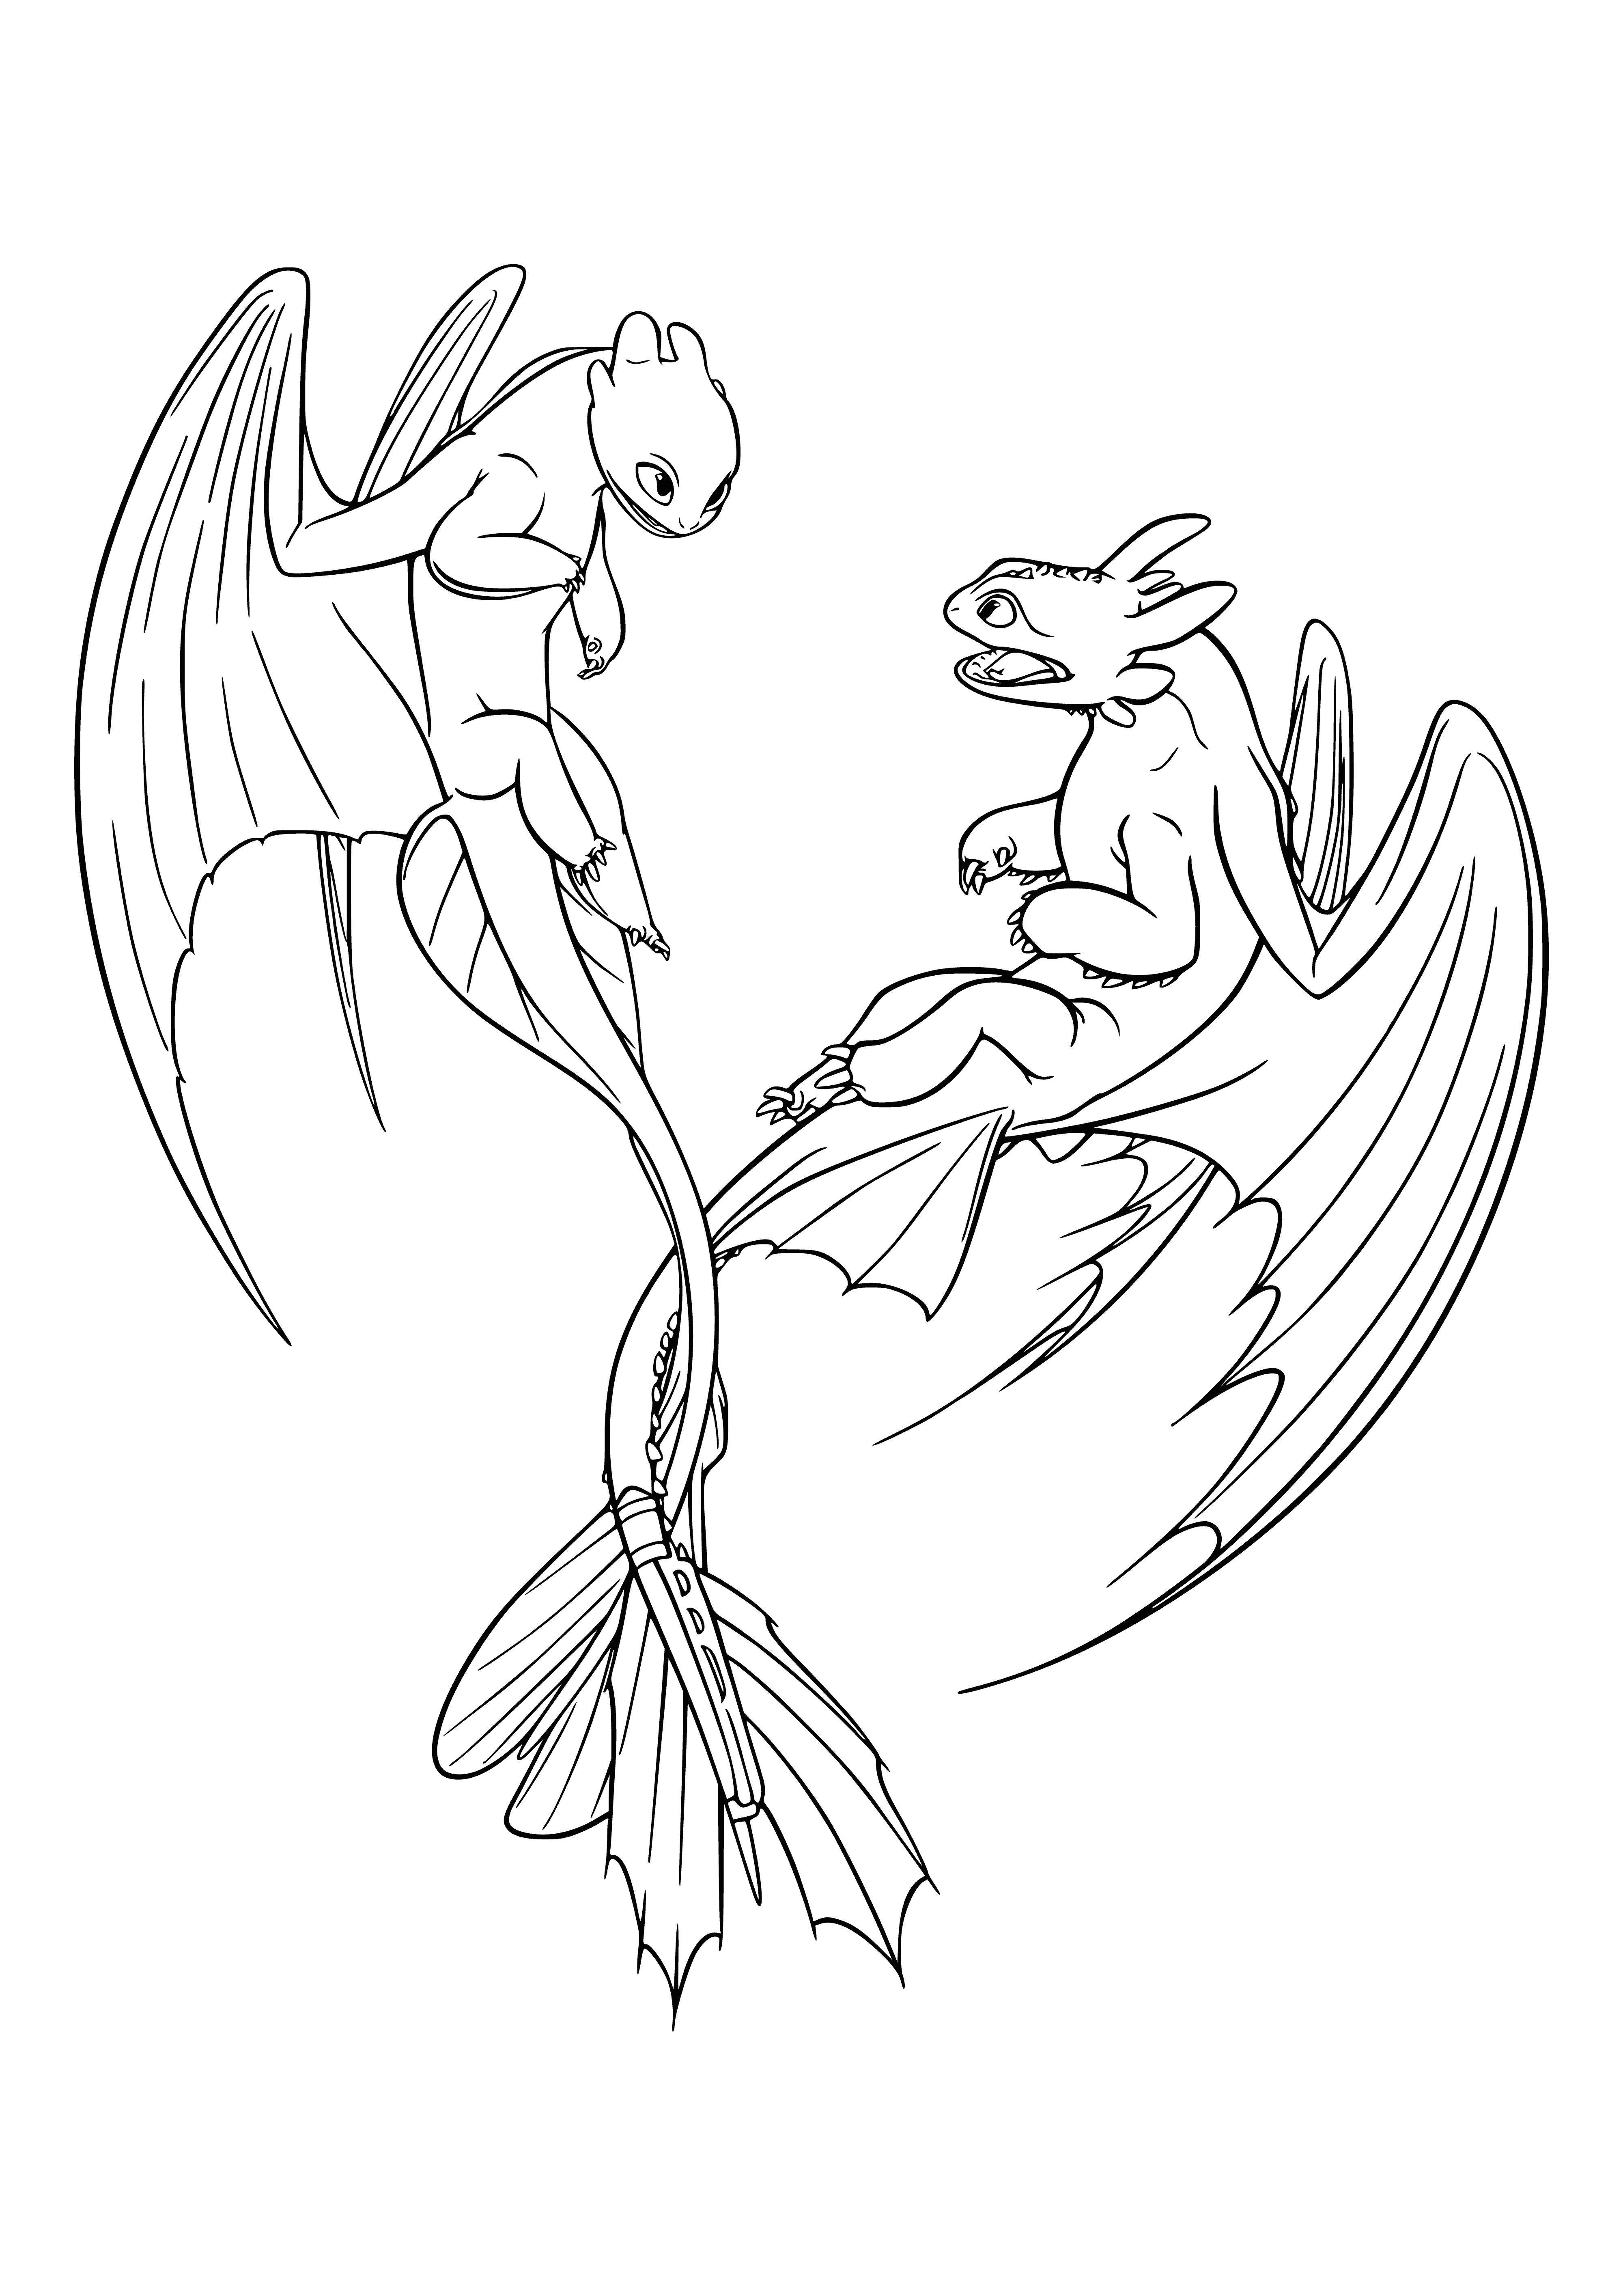 Day Fury and Toothless coloring page